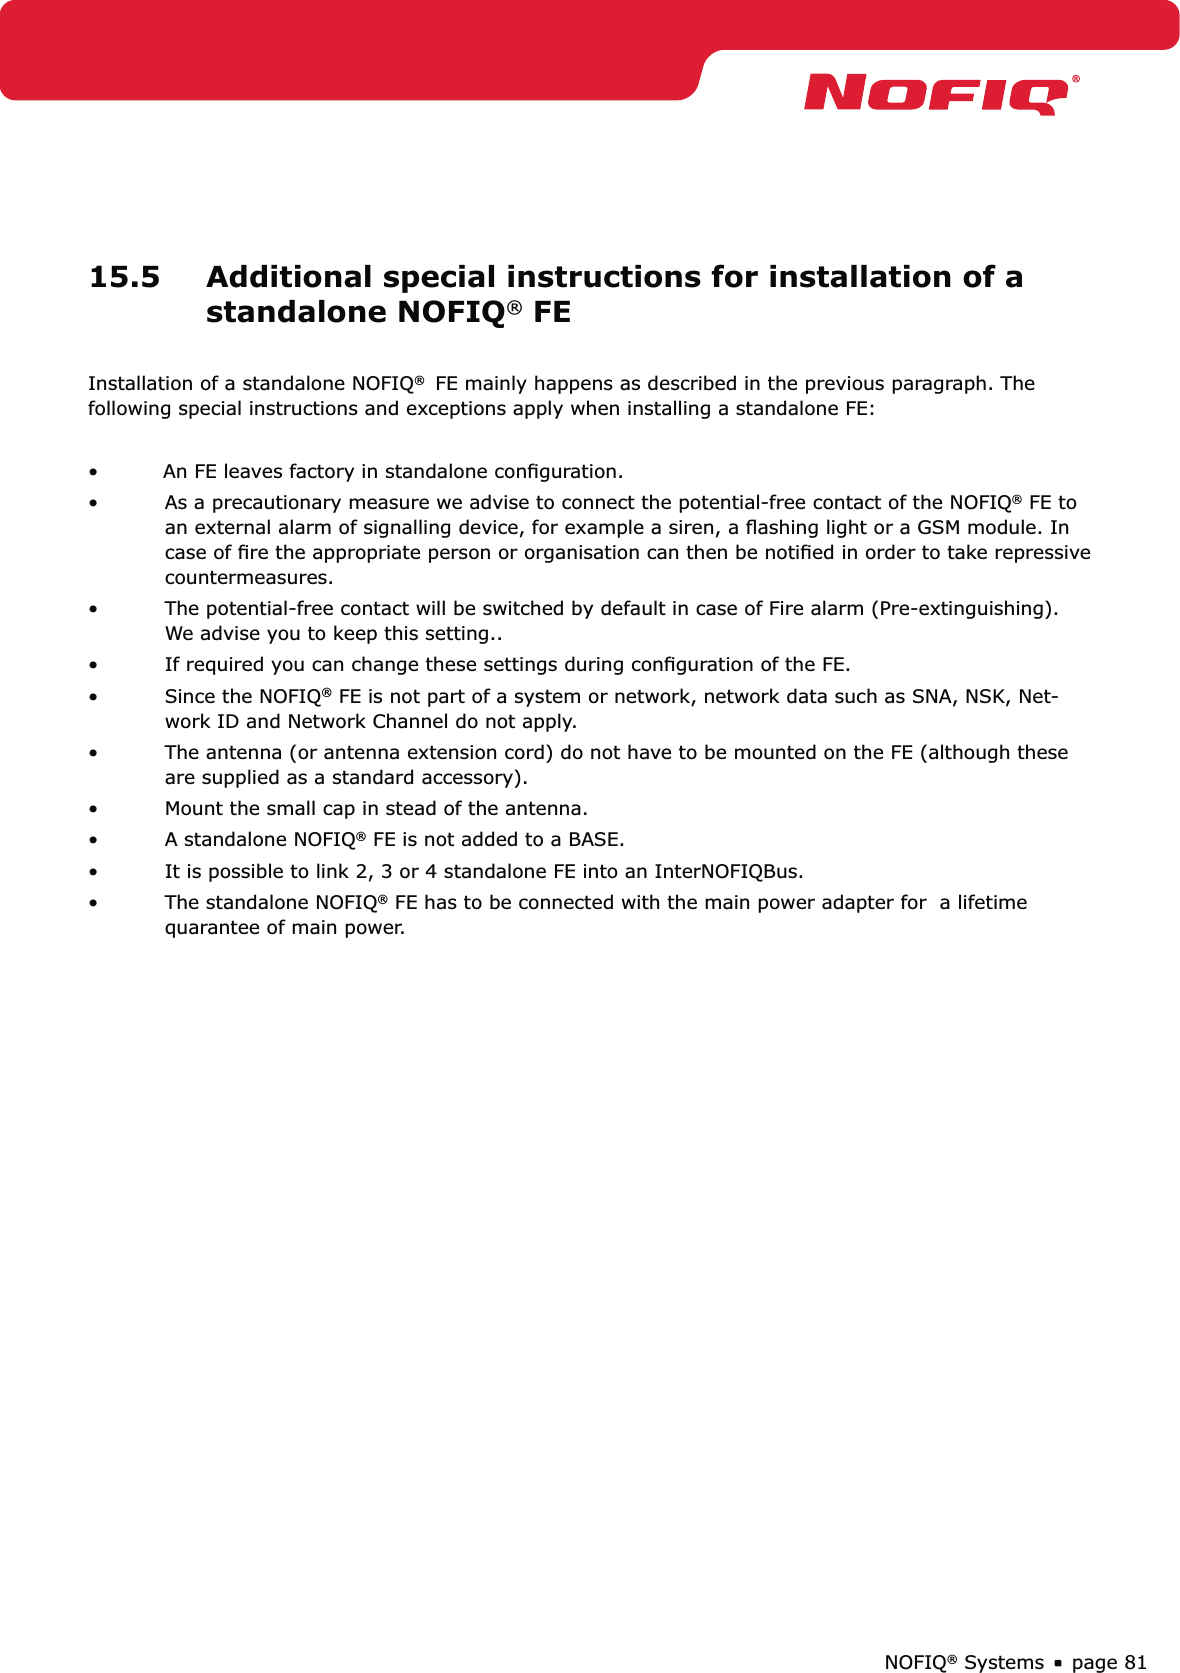 page 81NOFIQ® Systems15.5  Additional special instructions for installation of a standalone NOFIQ® FEInstallation of a standalone NOFIQ®  FE mainly happens as described in the previous paragraph. The following special instructions and exceptions apply when installing a standalone FE:•  An FE leaves factory in standalone conﬁguration.As a precautionary measure we advise to connect the potential-free contact of the NOFIQ•  ® FE to an external alarm of signalling device, for example a siren, a ﬂashing light or a GSM module. In case of ﬁre the appropriate person or organisation can then be notiﬁed in order to take repressive countermeasures.The potential-free contact will be switched by default in case of Fire alarm (Pre-extinguishing). • We advise you to keep this setting..If required you can change these settings during conﬁguration of the FE.• Since the NOFIQ•  ® FE is not part of a system or network, network data such as SNA, NSK, Net-work ID and Network Channel do not apply.The antenna (or antenna extension cord) do not have to be mounted on the FE (although these • are supplied as a standard accessory).Mount the small cap in stead of the antenna.• A standalone NOFIQ•  ® FE is not added to a BASE.It is possible to link 2, 3 or 4 standalone FE into an InterNOFIQBus.• The standalone NOFIQ•  ® FE has to be connected with the main power adapter for  a lifetime  quarantee of main power.